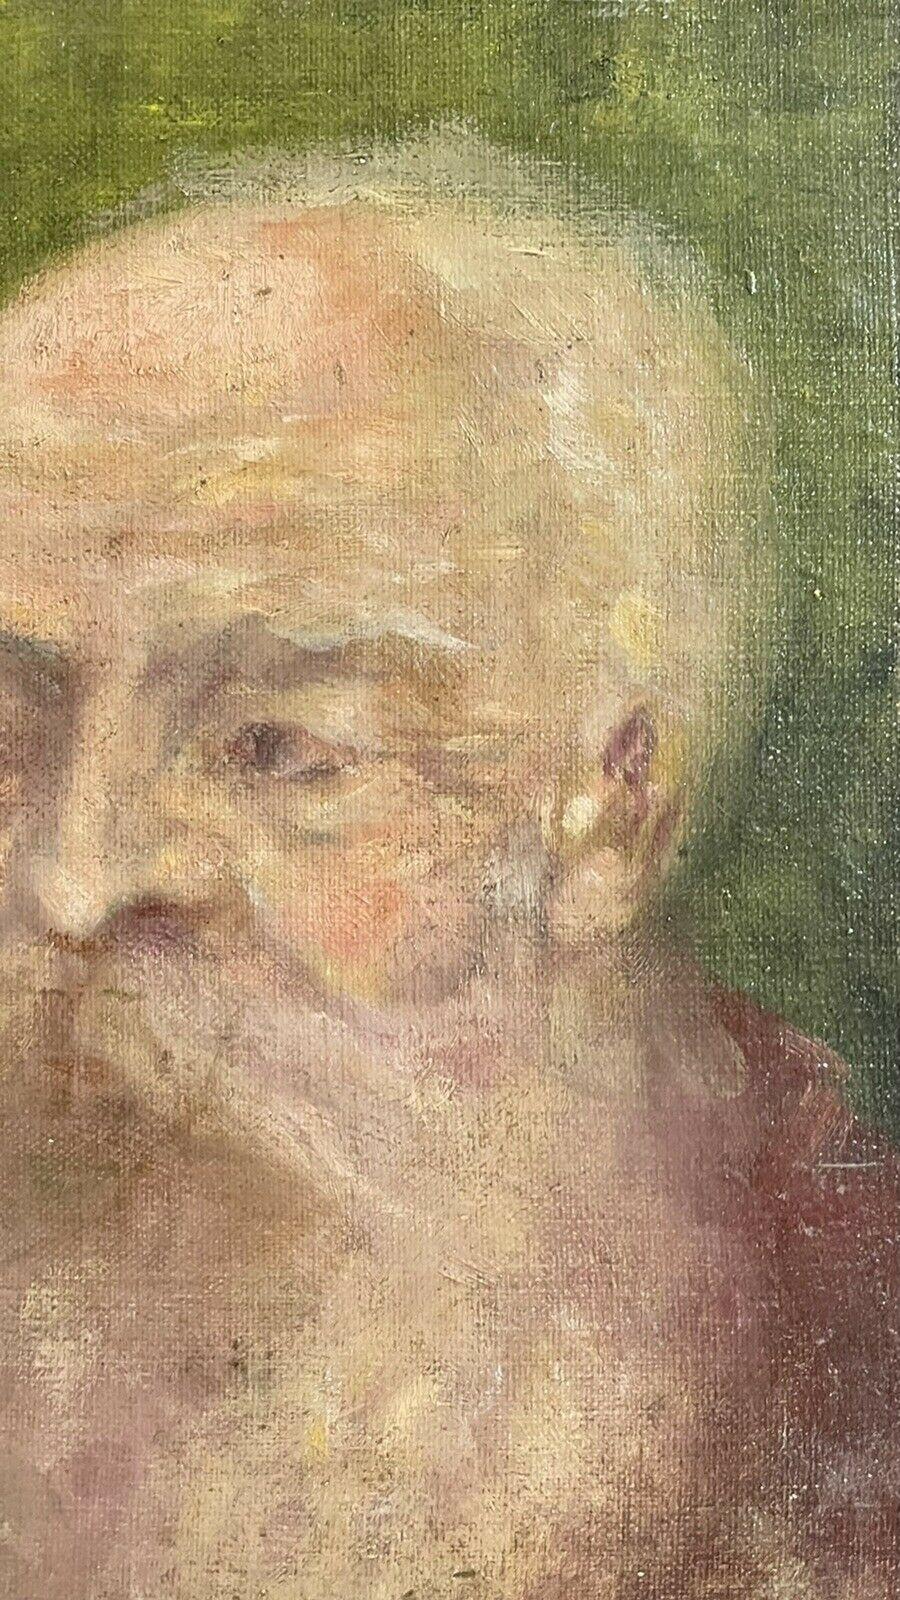 Artist/ School: French School, late 19th century, indistinctly monogrammed upper left corner.

Title: Portrait of a Bearded Man

Medium: oil painting on canvas laid to board, unframed.

Size:  painting: 9.25 x 7.25 inches

Provenance: from a private